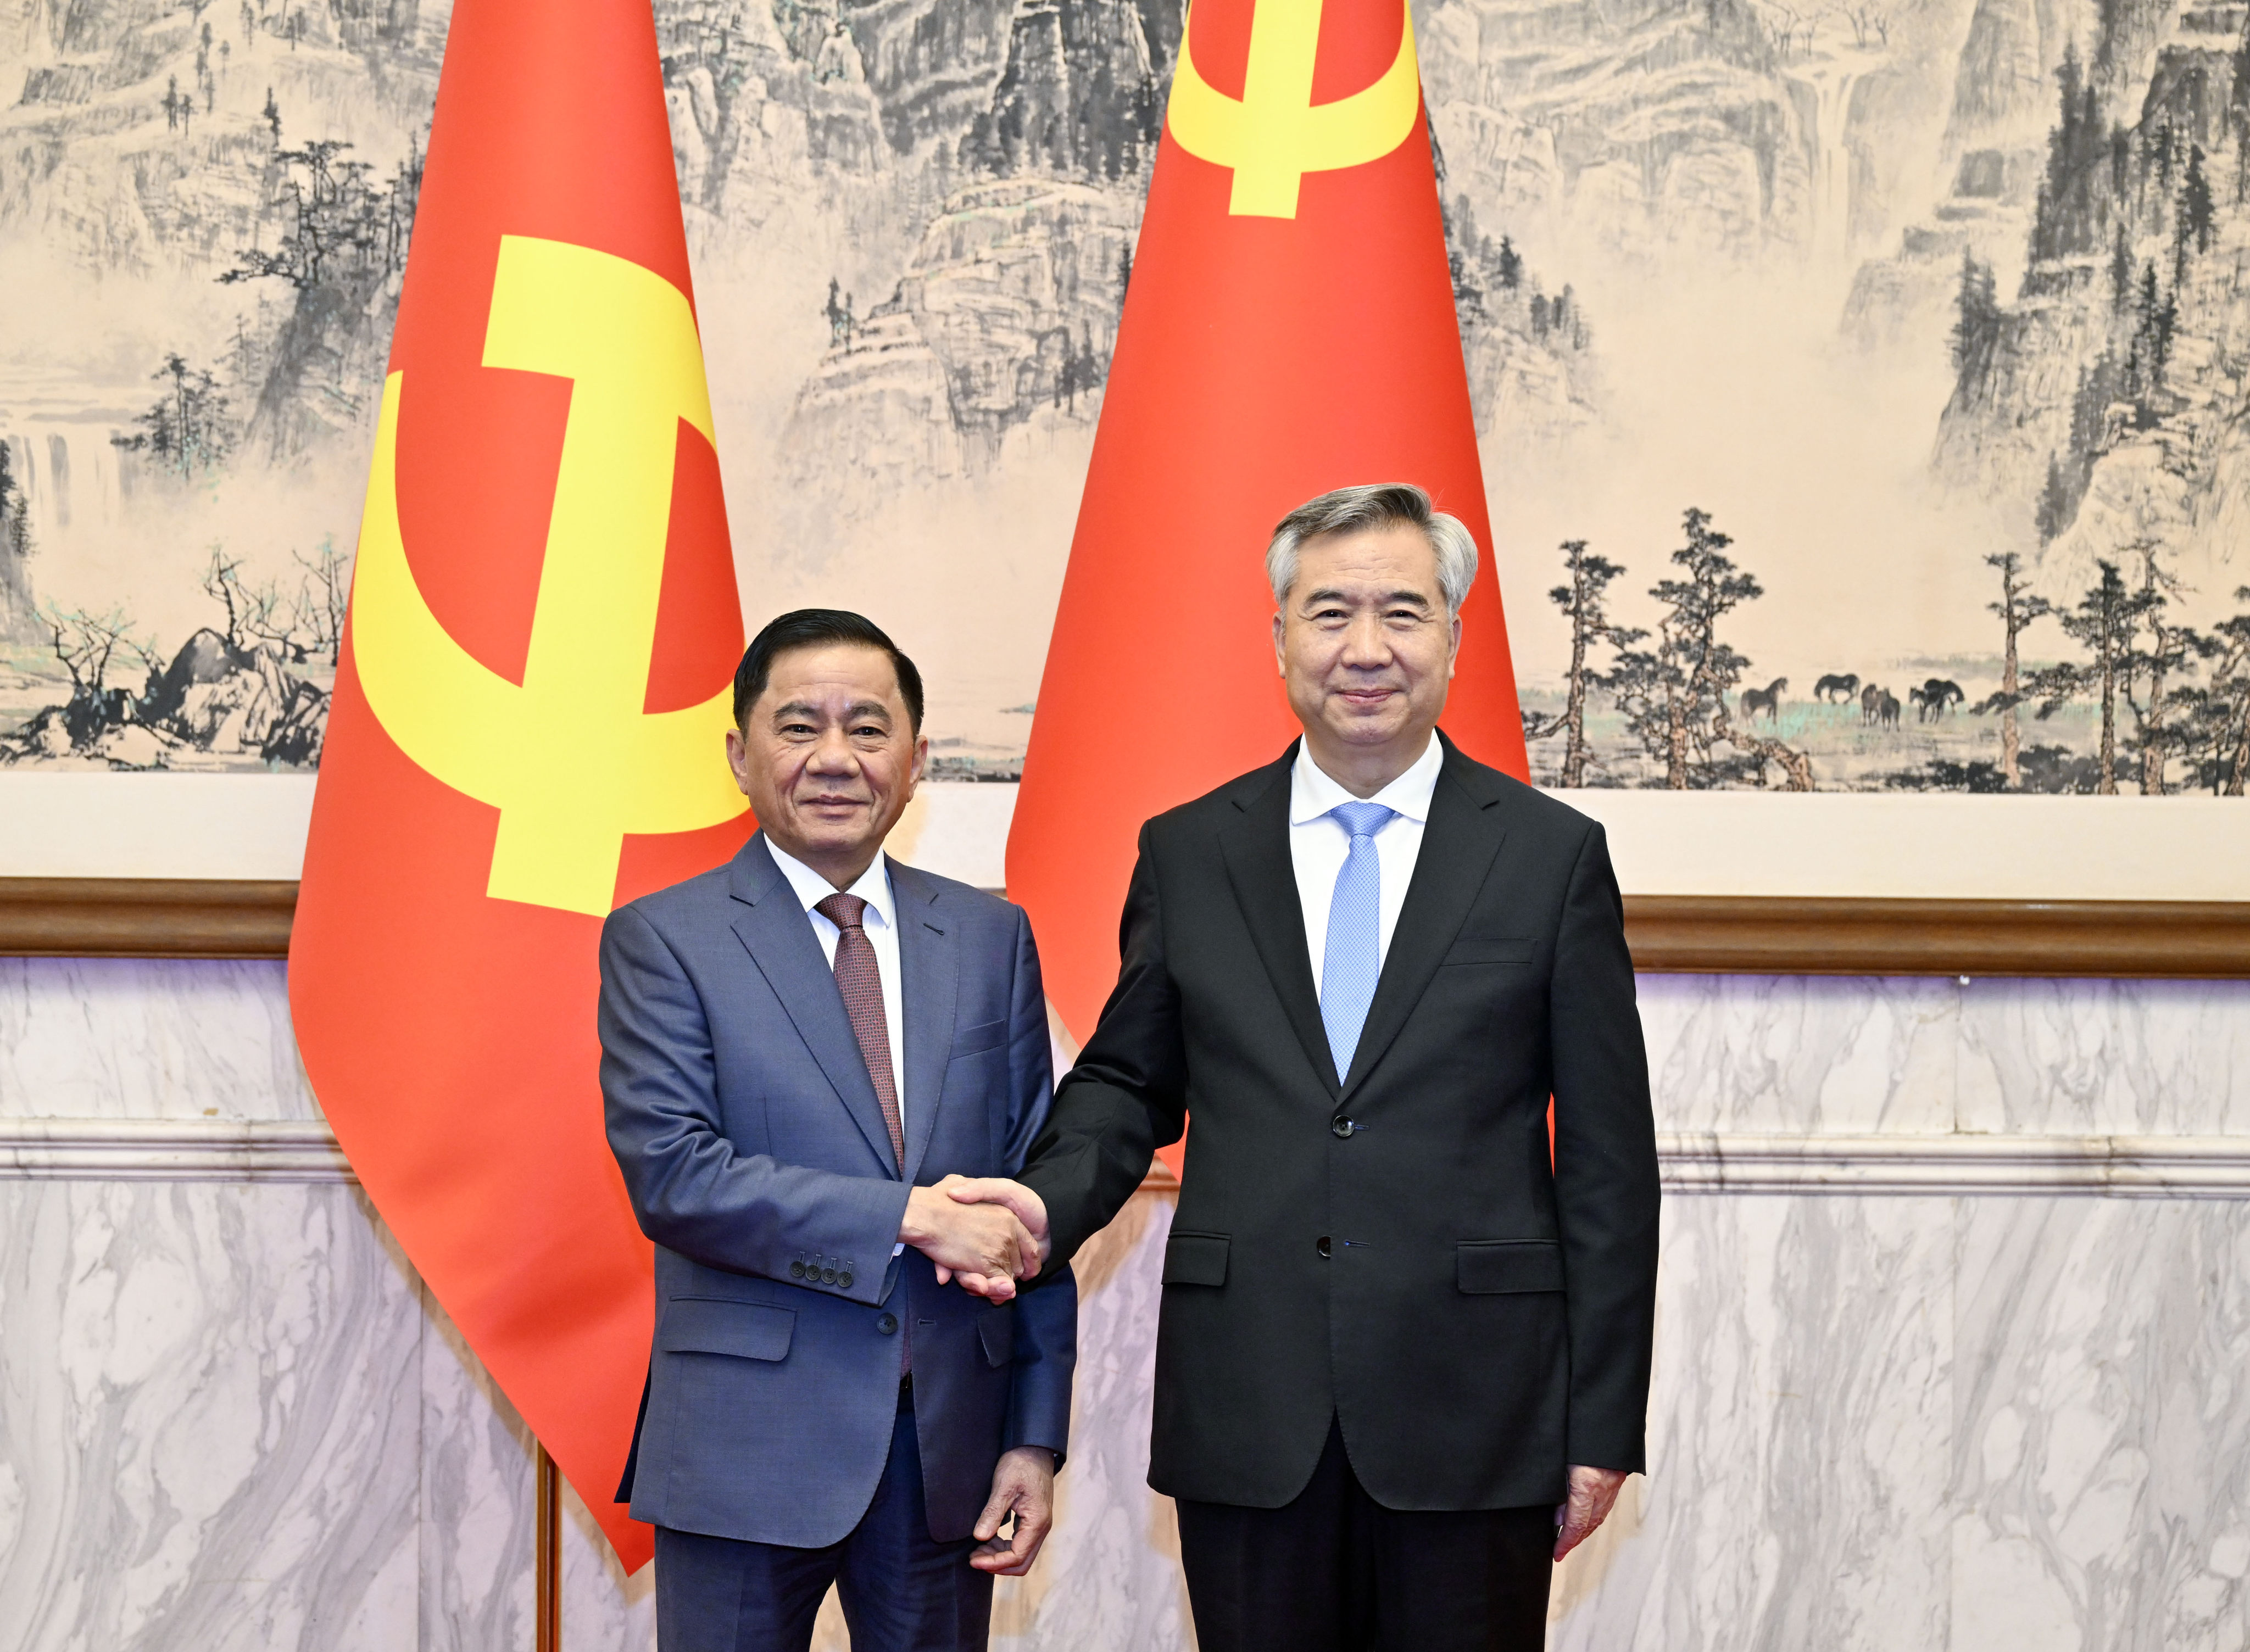 Li Xi (right), head of China’s Central Commission for Discipline Inspection, said Beijing is willing to “deepen cooperation in anti-corruption multilateral mechanisms” as he held talks with his Vietnamese counterpart, Tran Cam Tu (left), in Beijing on Monday. Photo: Xinhua